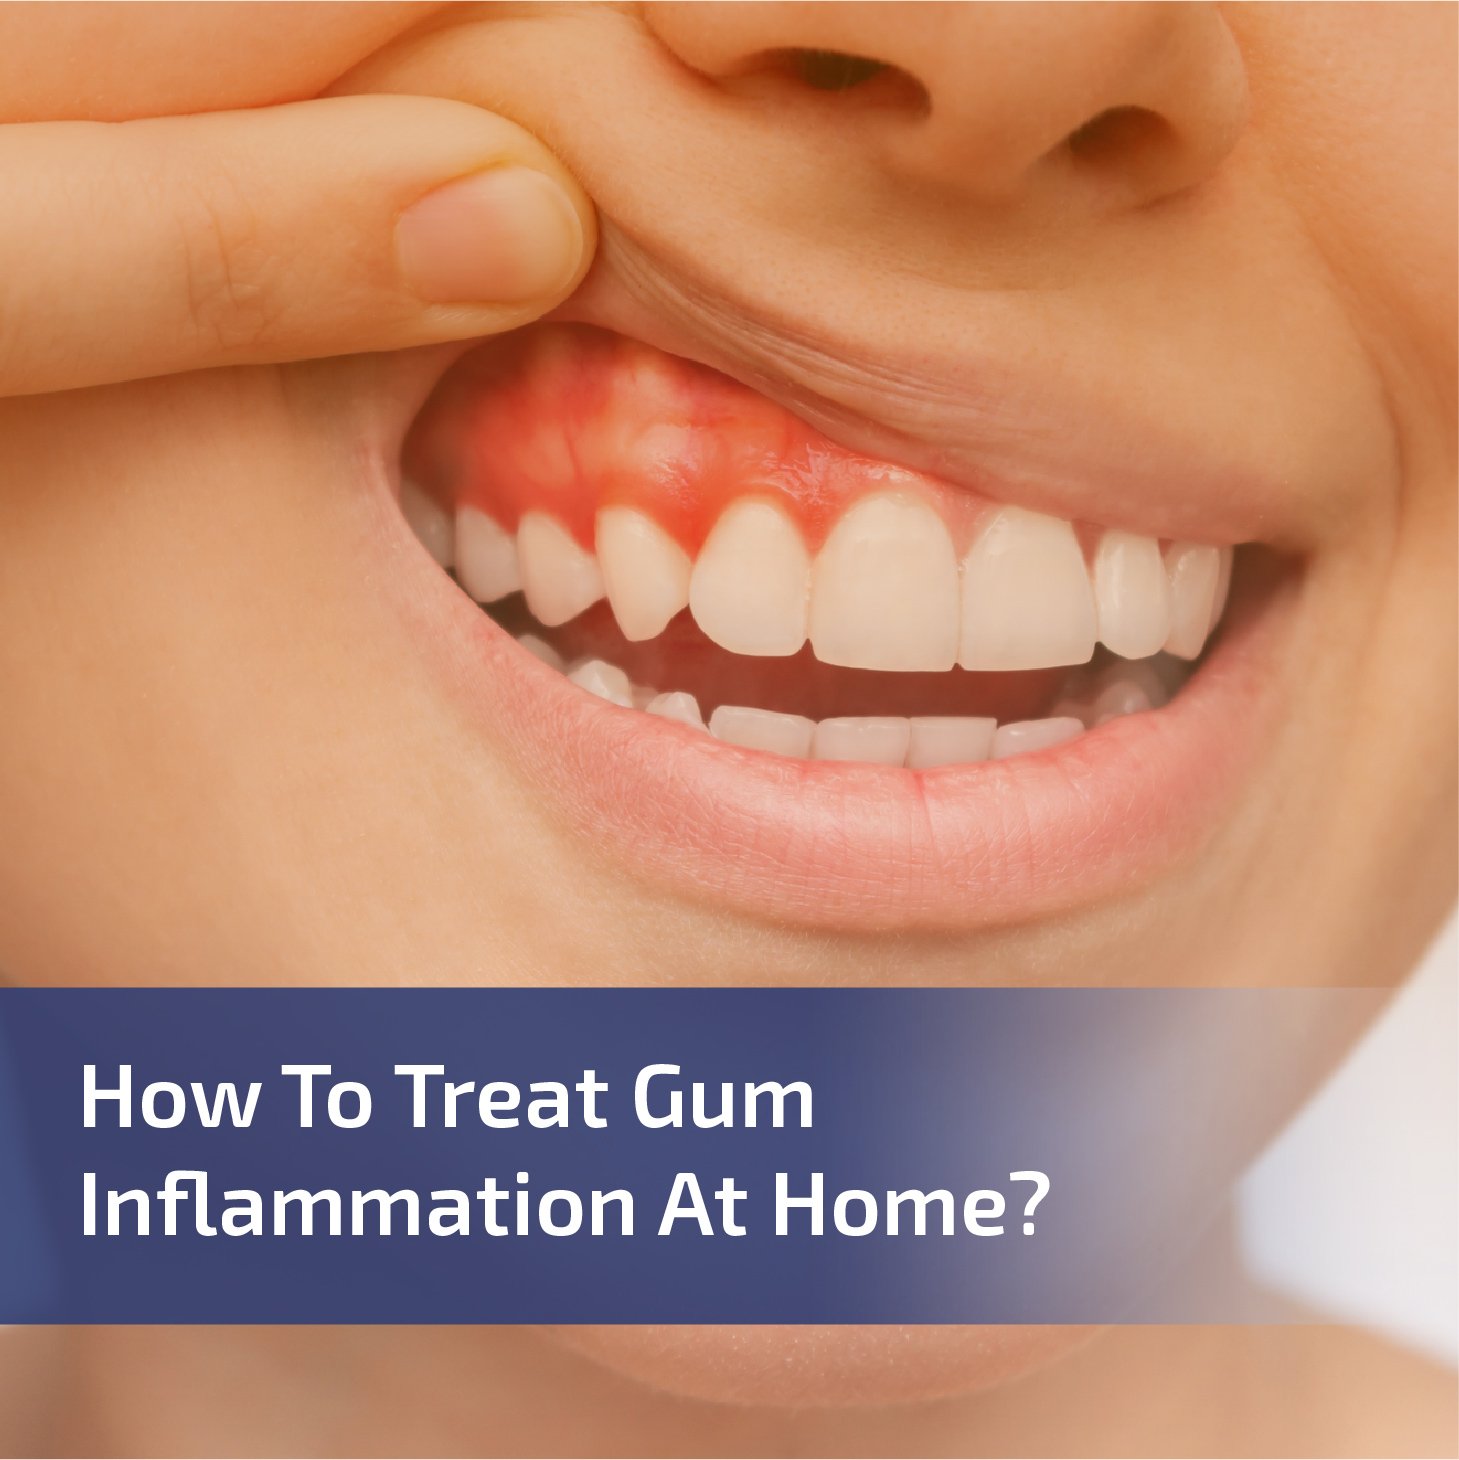 How to Treat Gum Inflammation at Home